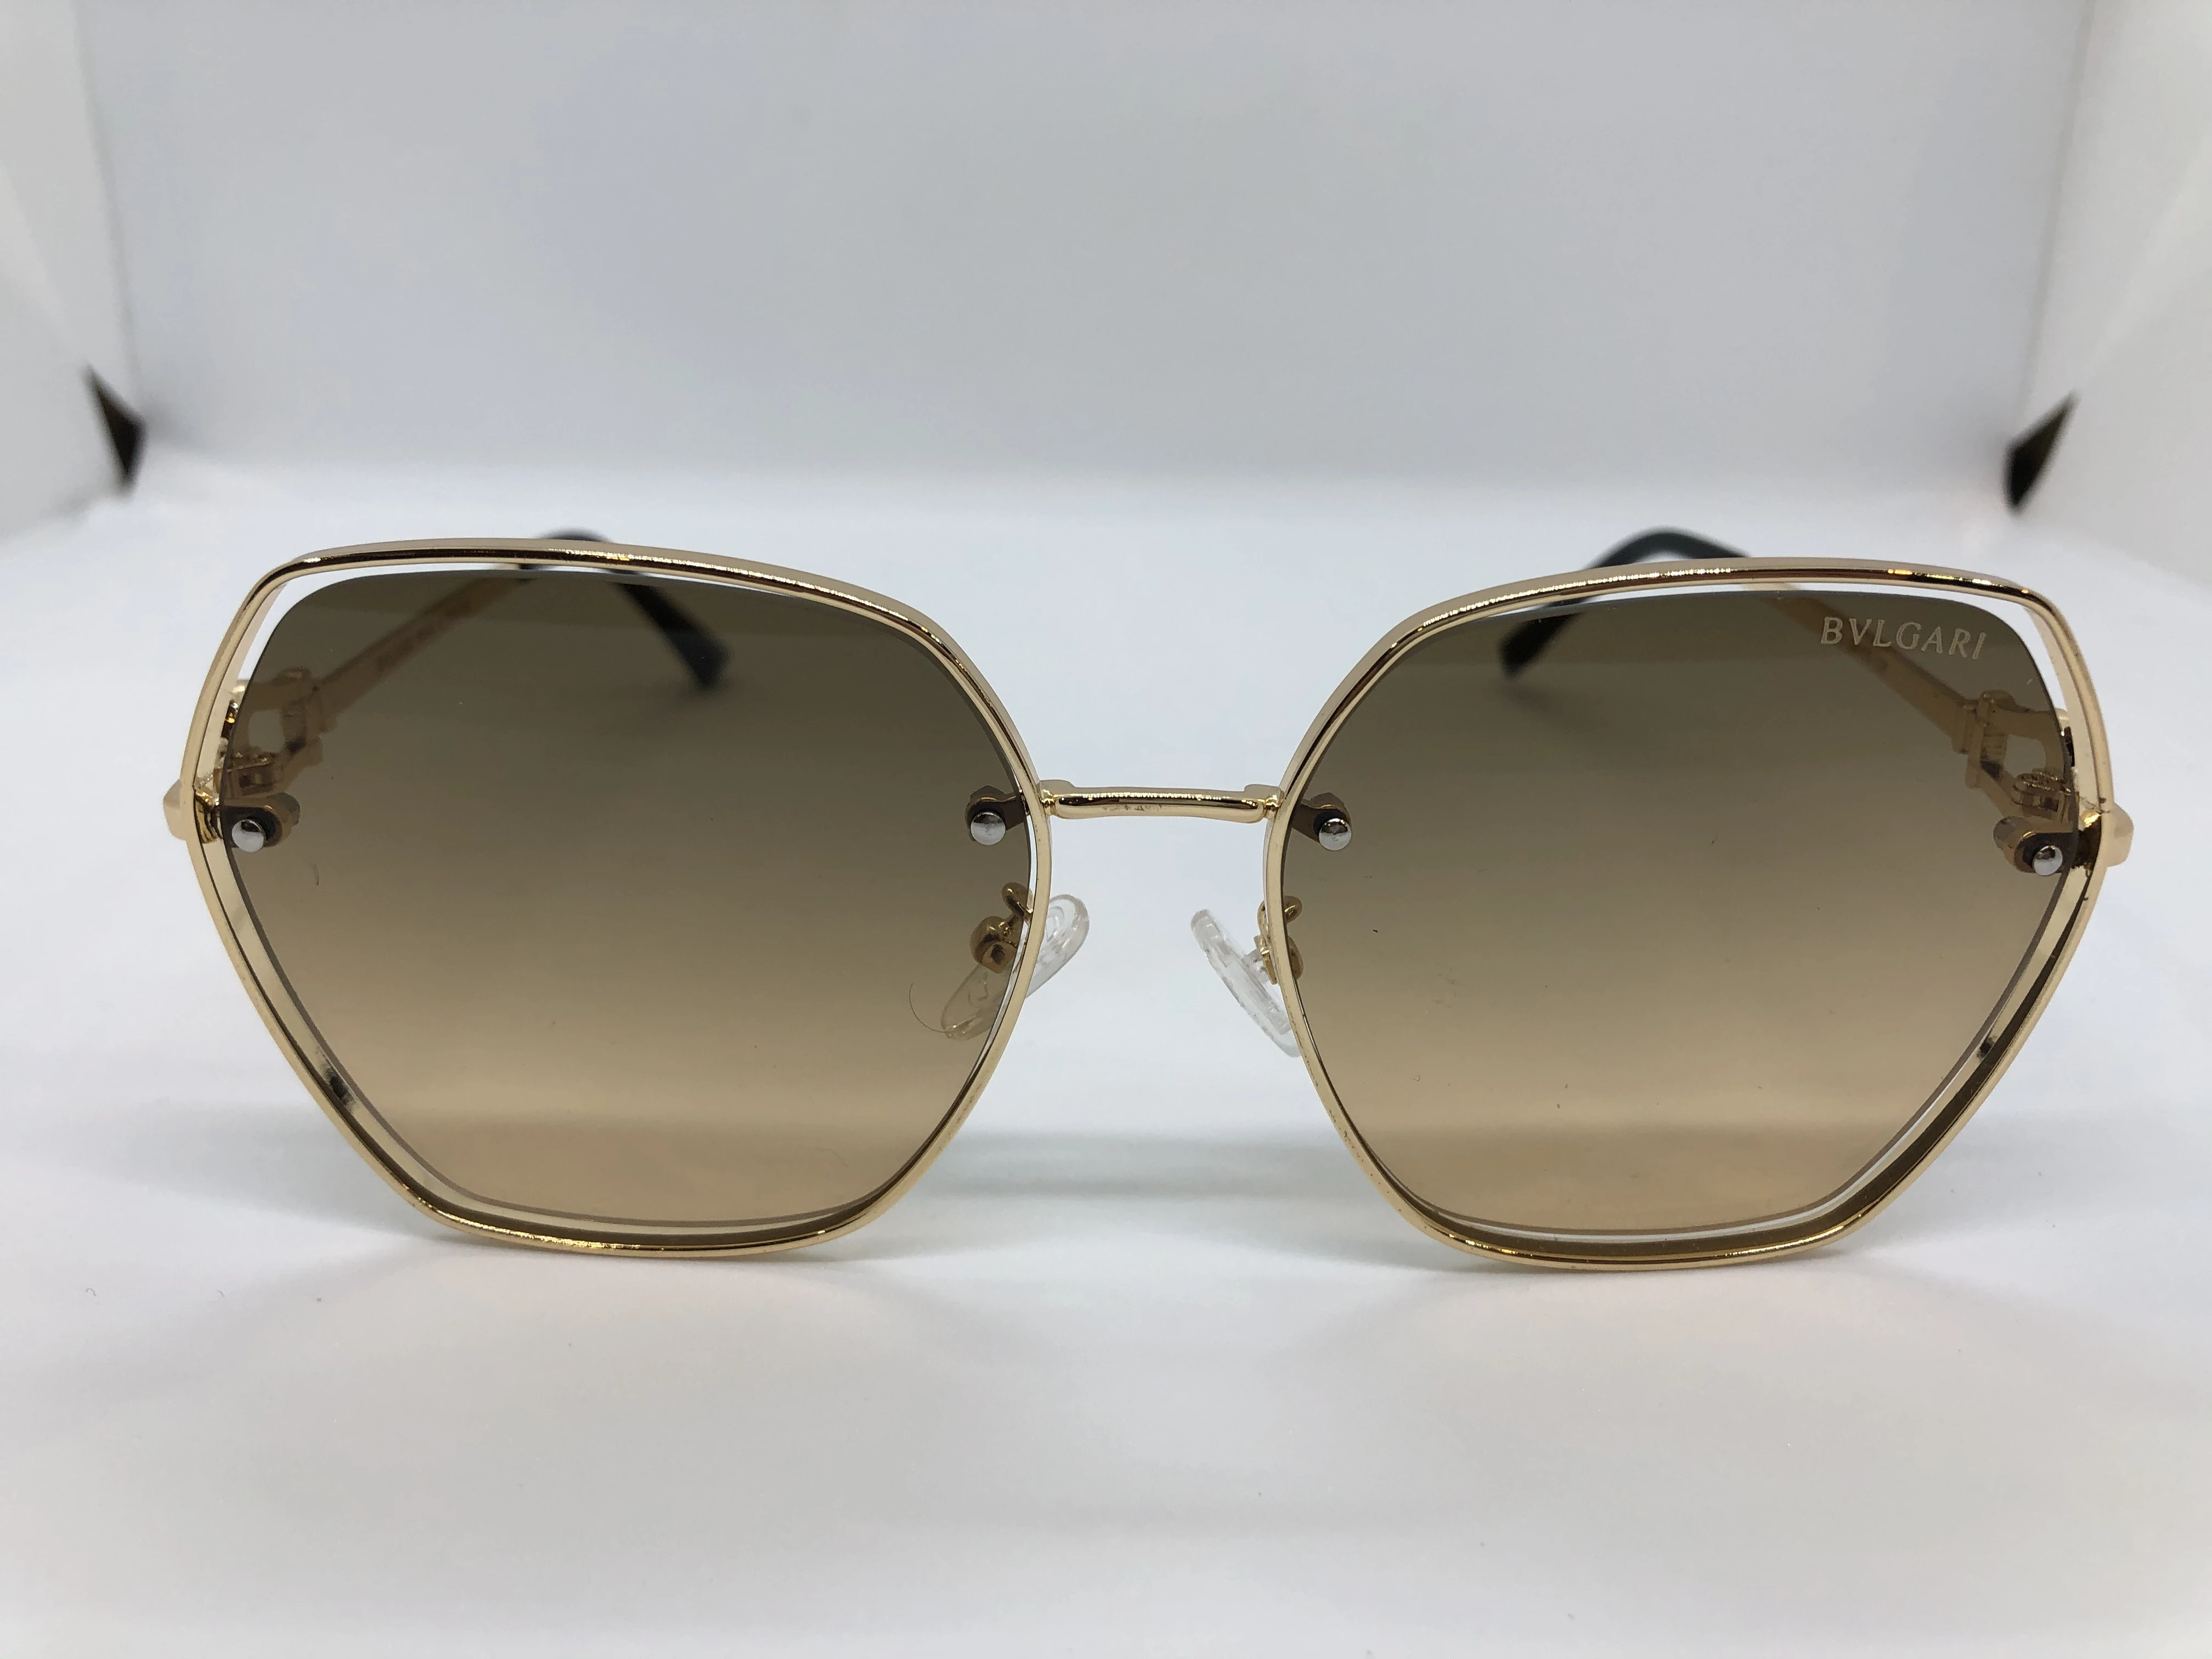 Sunglasses - from Bvlgari - with a golden metal frame - transparent golden lenses - and a golden metal arm - with a golden logo - for women